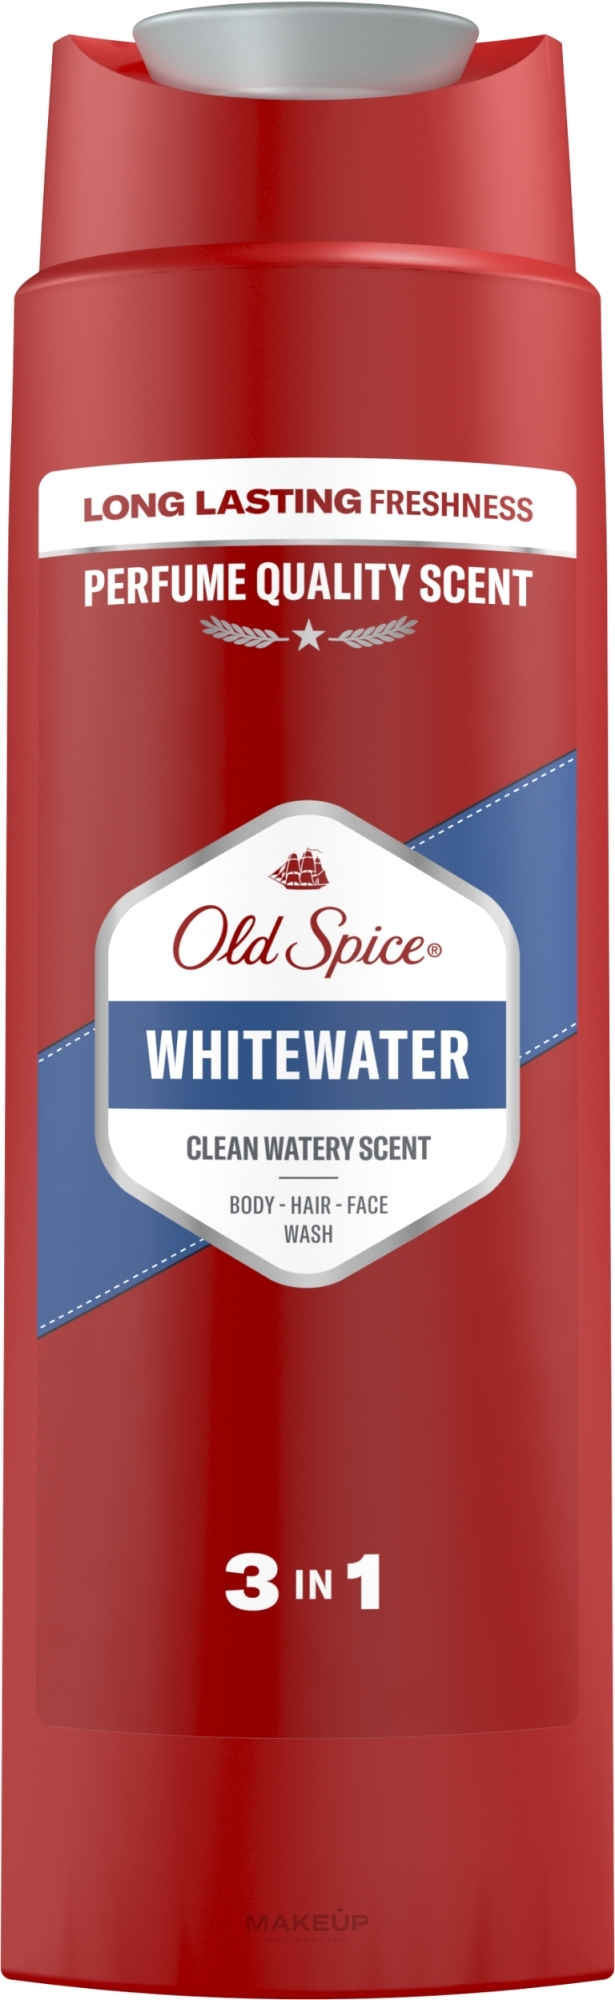 Shower Gel - Old Spice Whitewater 3 In 1 Body-Hair-Face Wash — photo 250 ml